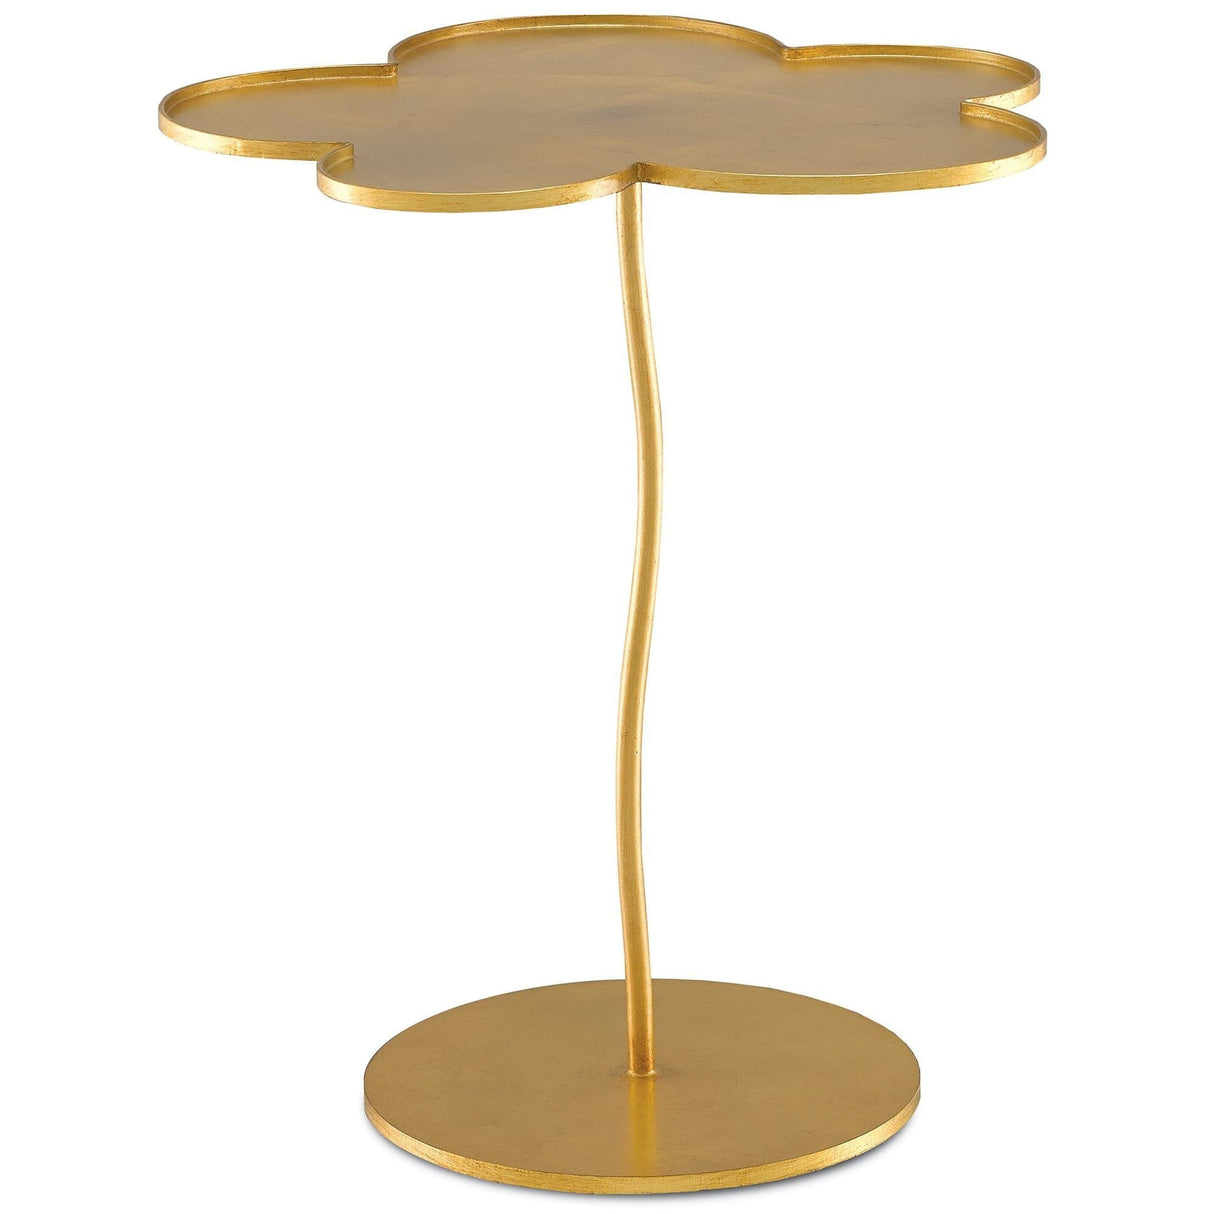 Currey and Company Fleur Accent Table - Large Furniture currey-co-4000-0069